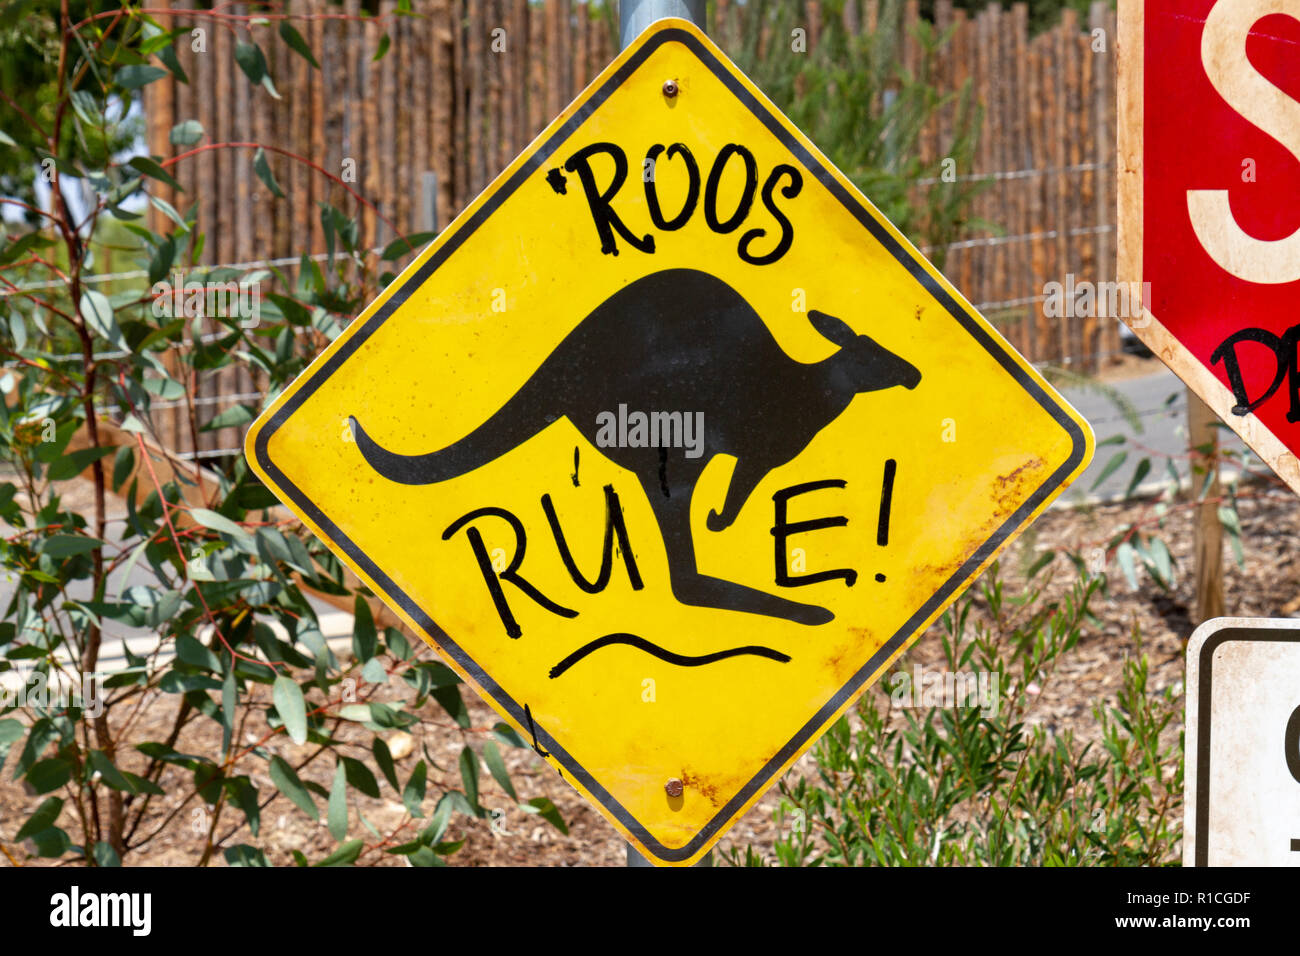 Road traffic sign adapted ('Roos Crossing') with environmentally friendly message, San Diego Zoo Safari Park, Escondido, CA, United States, Stock Photo